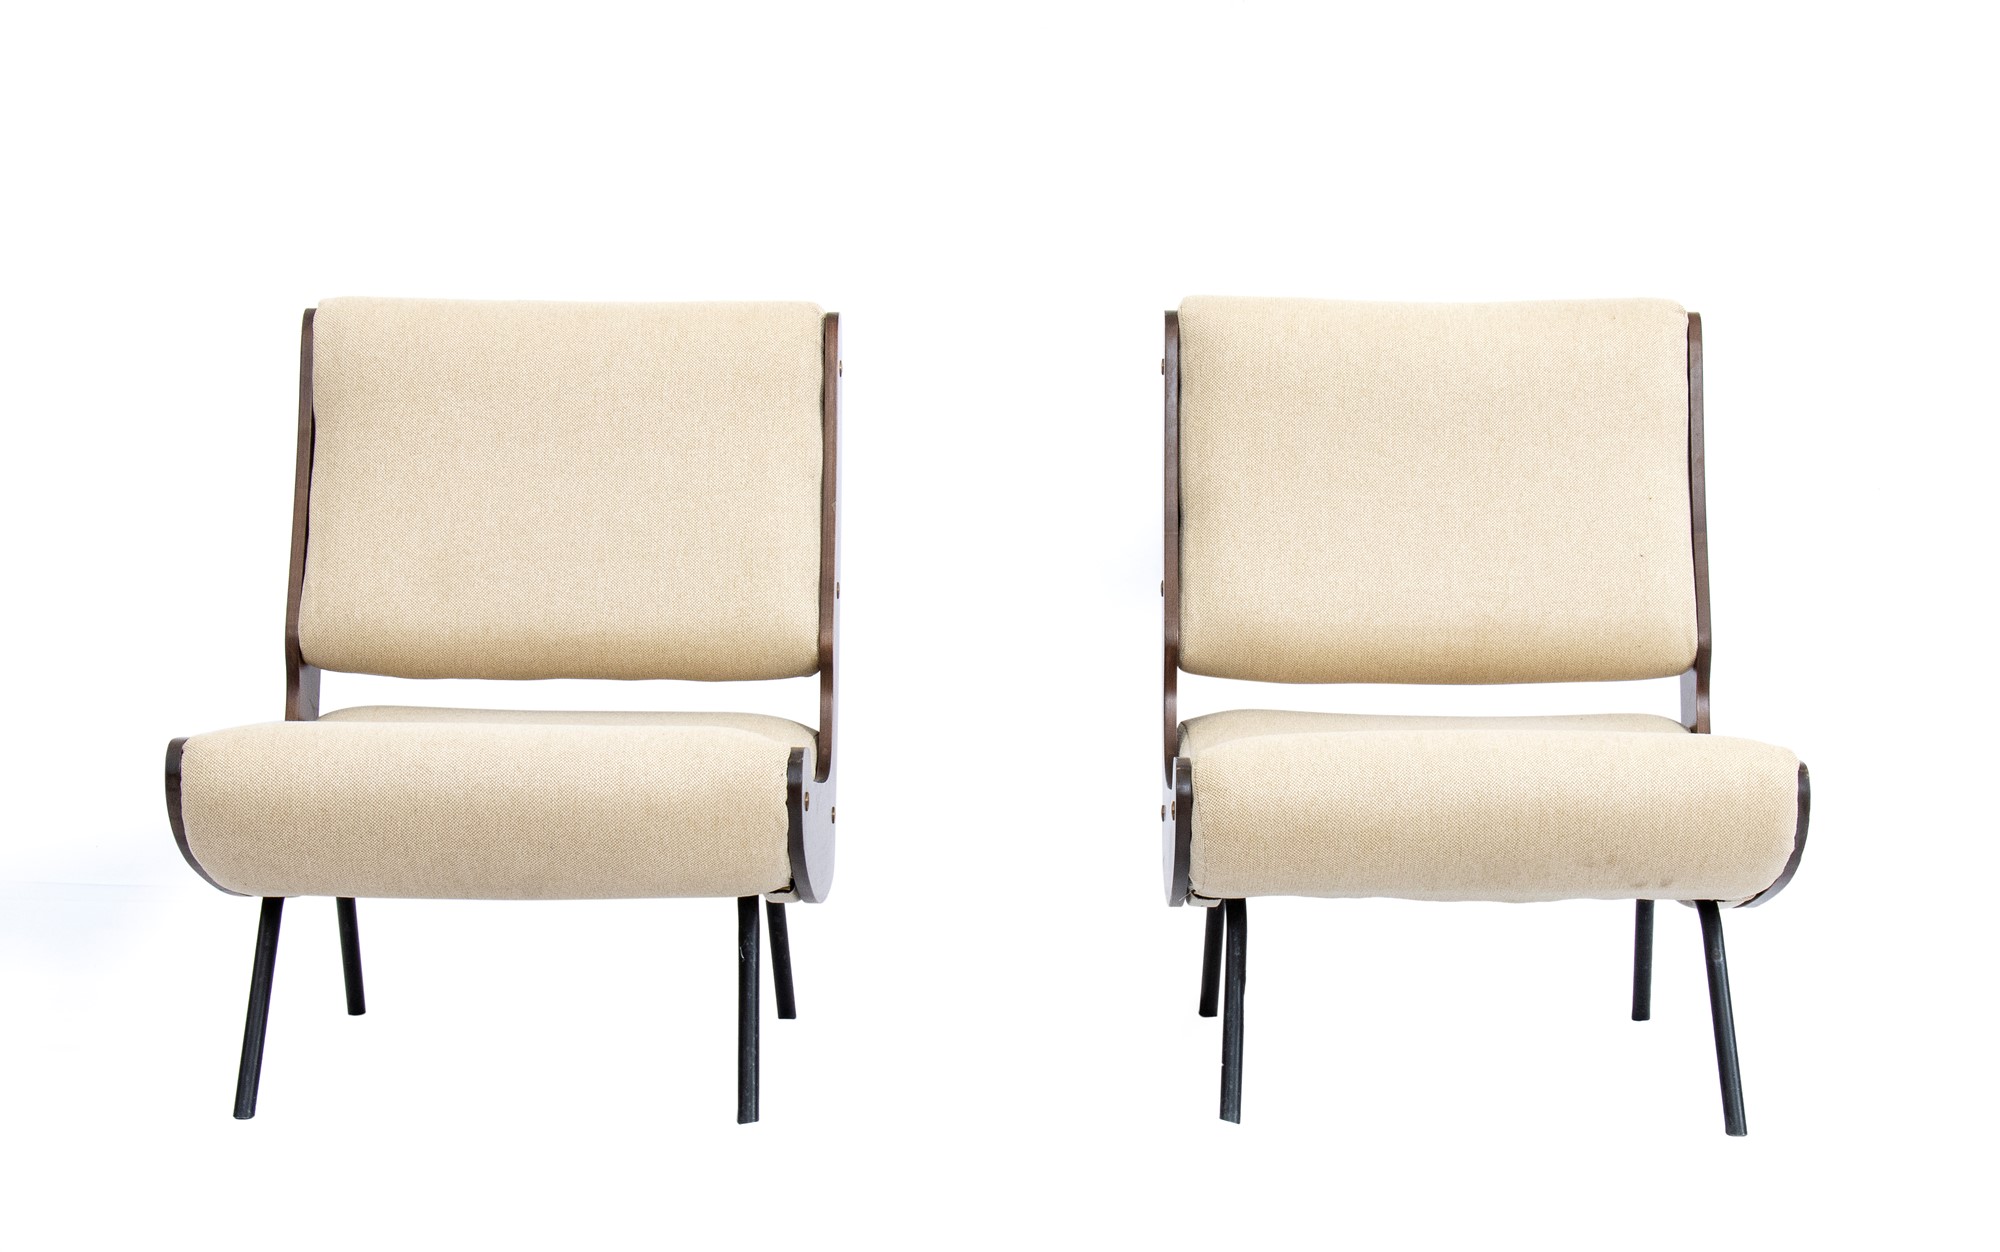 Gianfranco Frattini  Pair of armchairs mod. 863 with wooden and metal structure and brass details by - Image 11 of 19